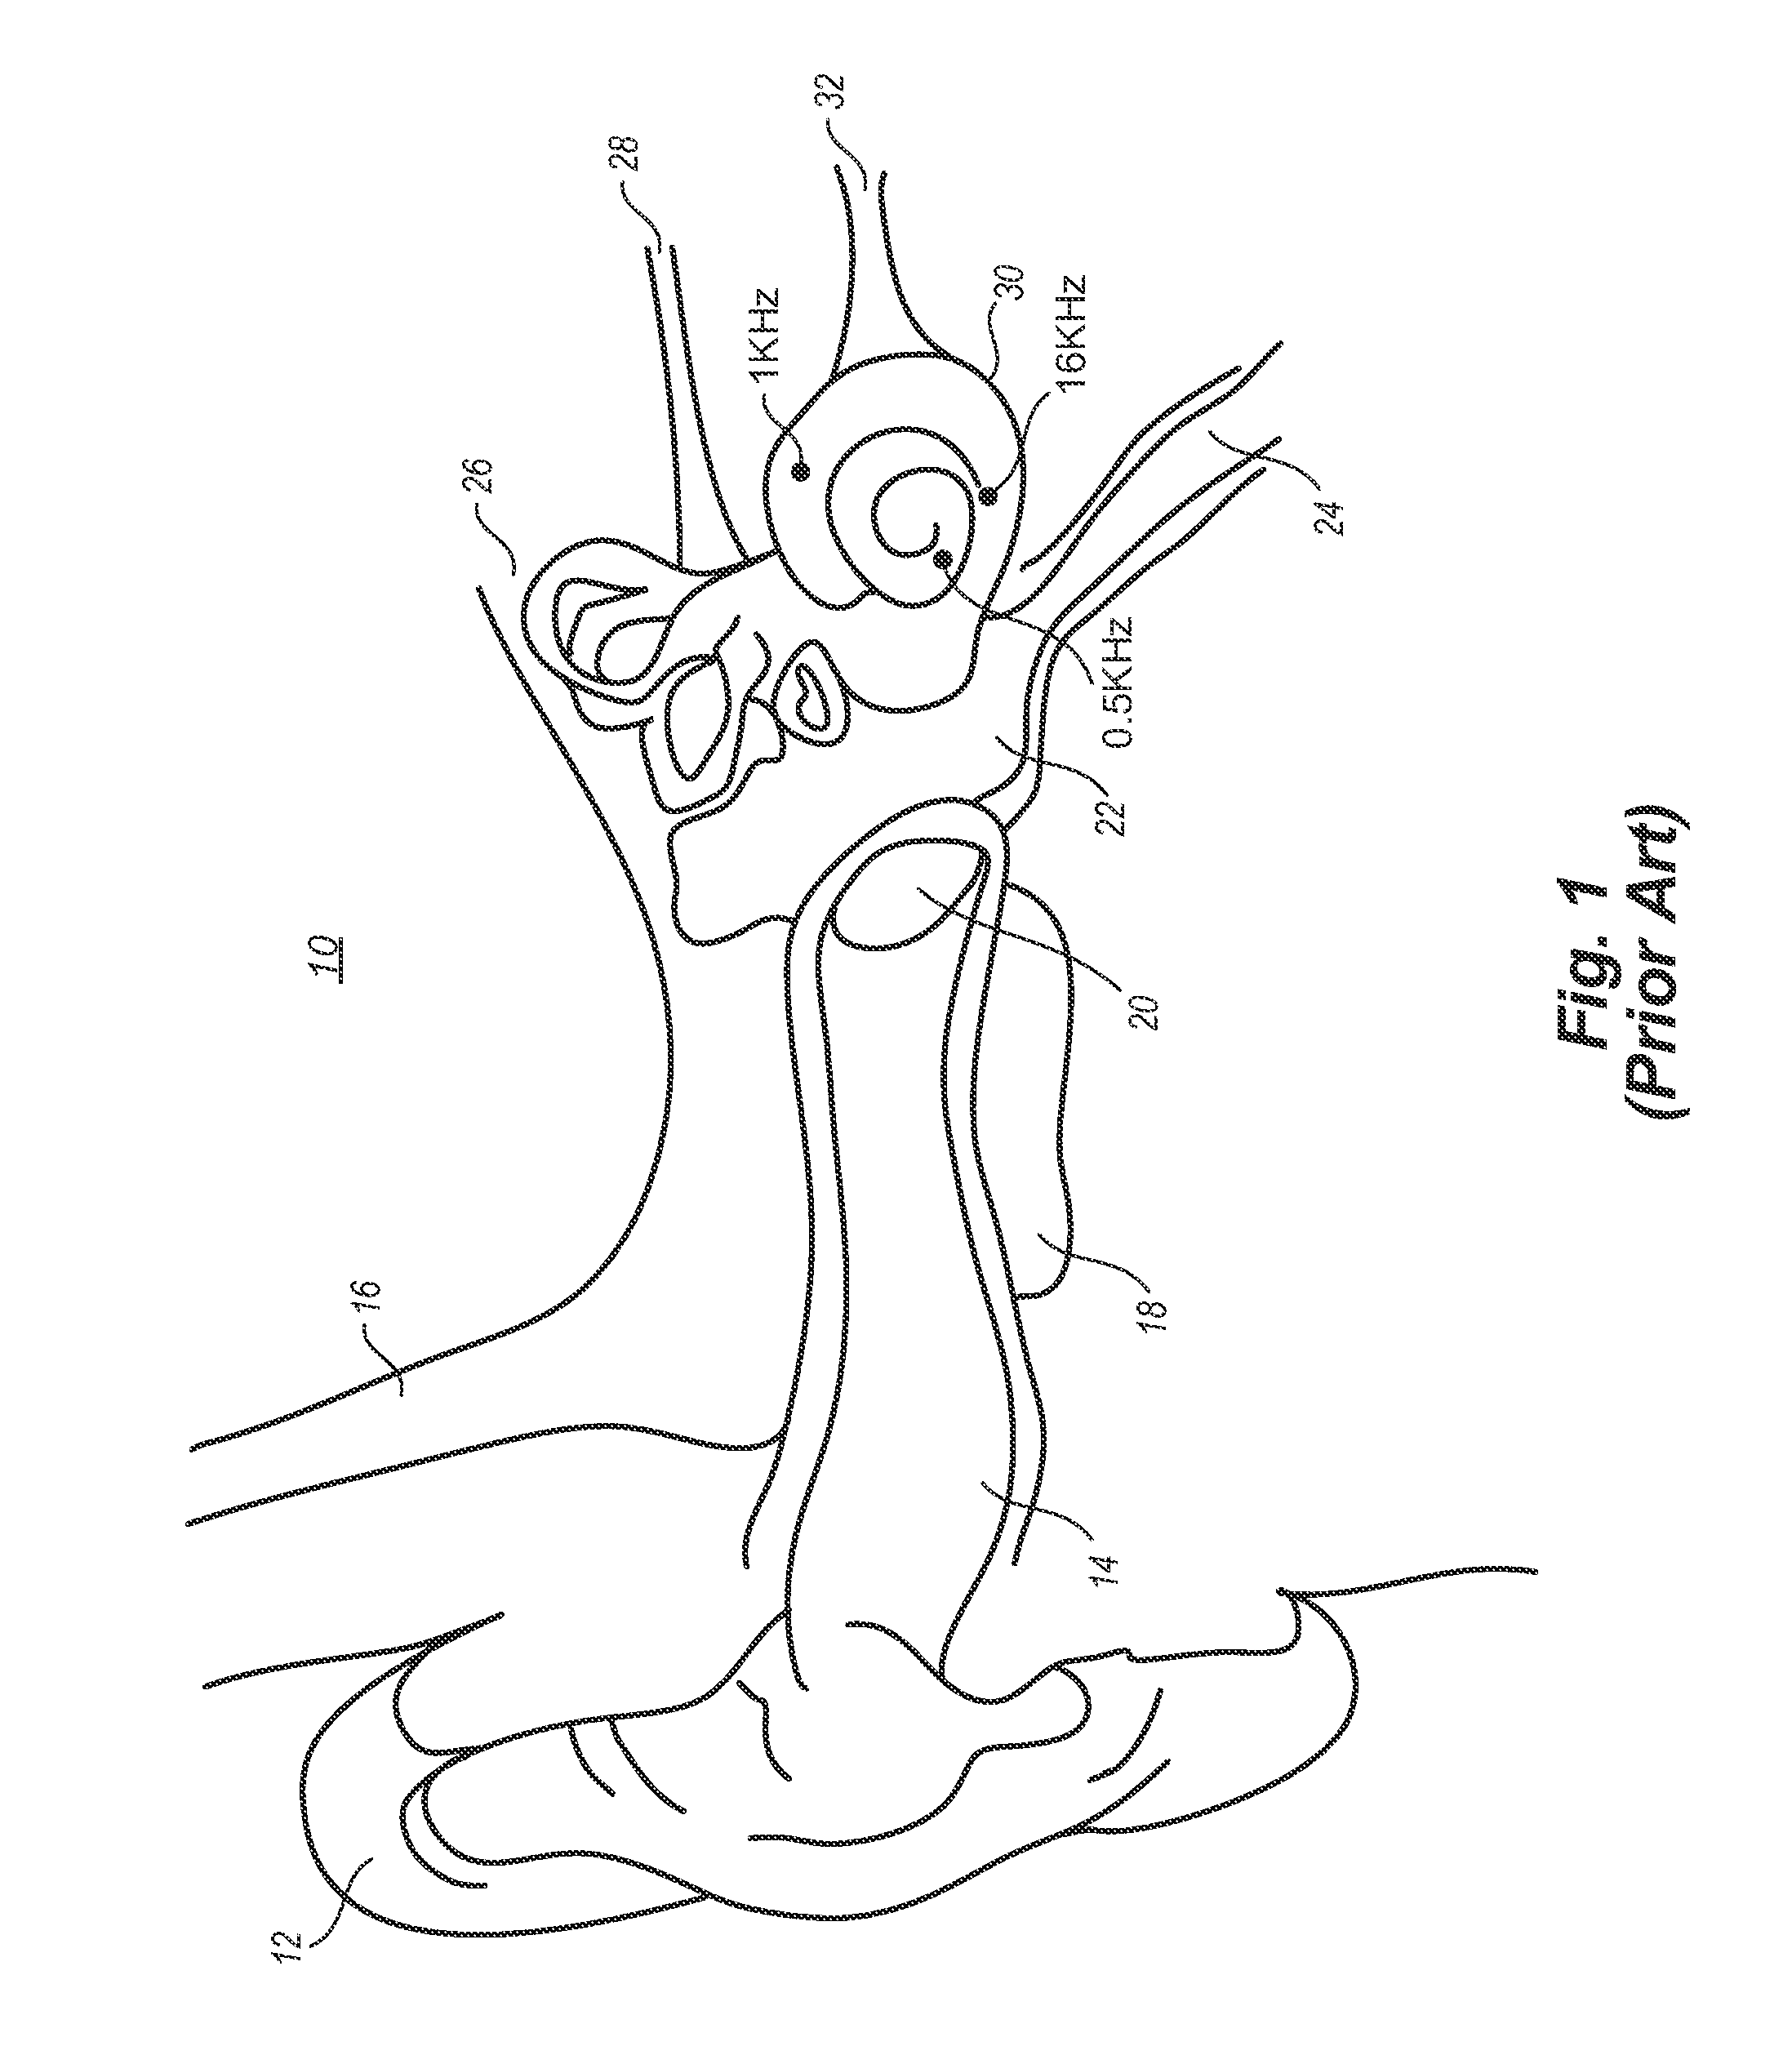 Localized therapeutic hypothermia system, device, and method